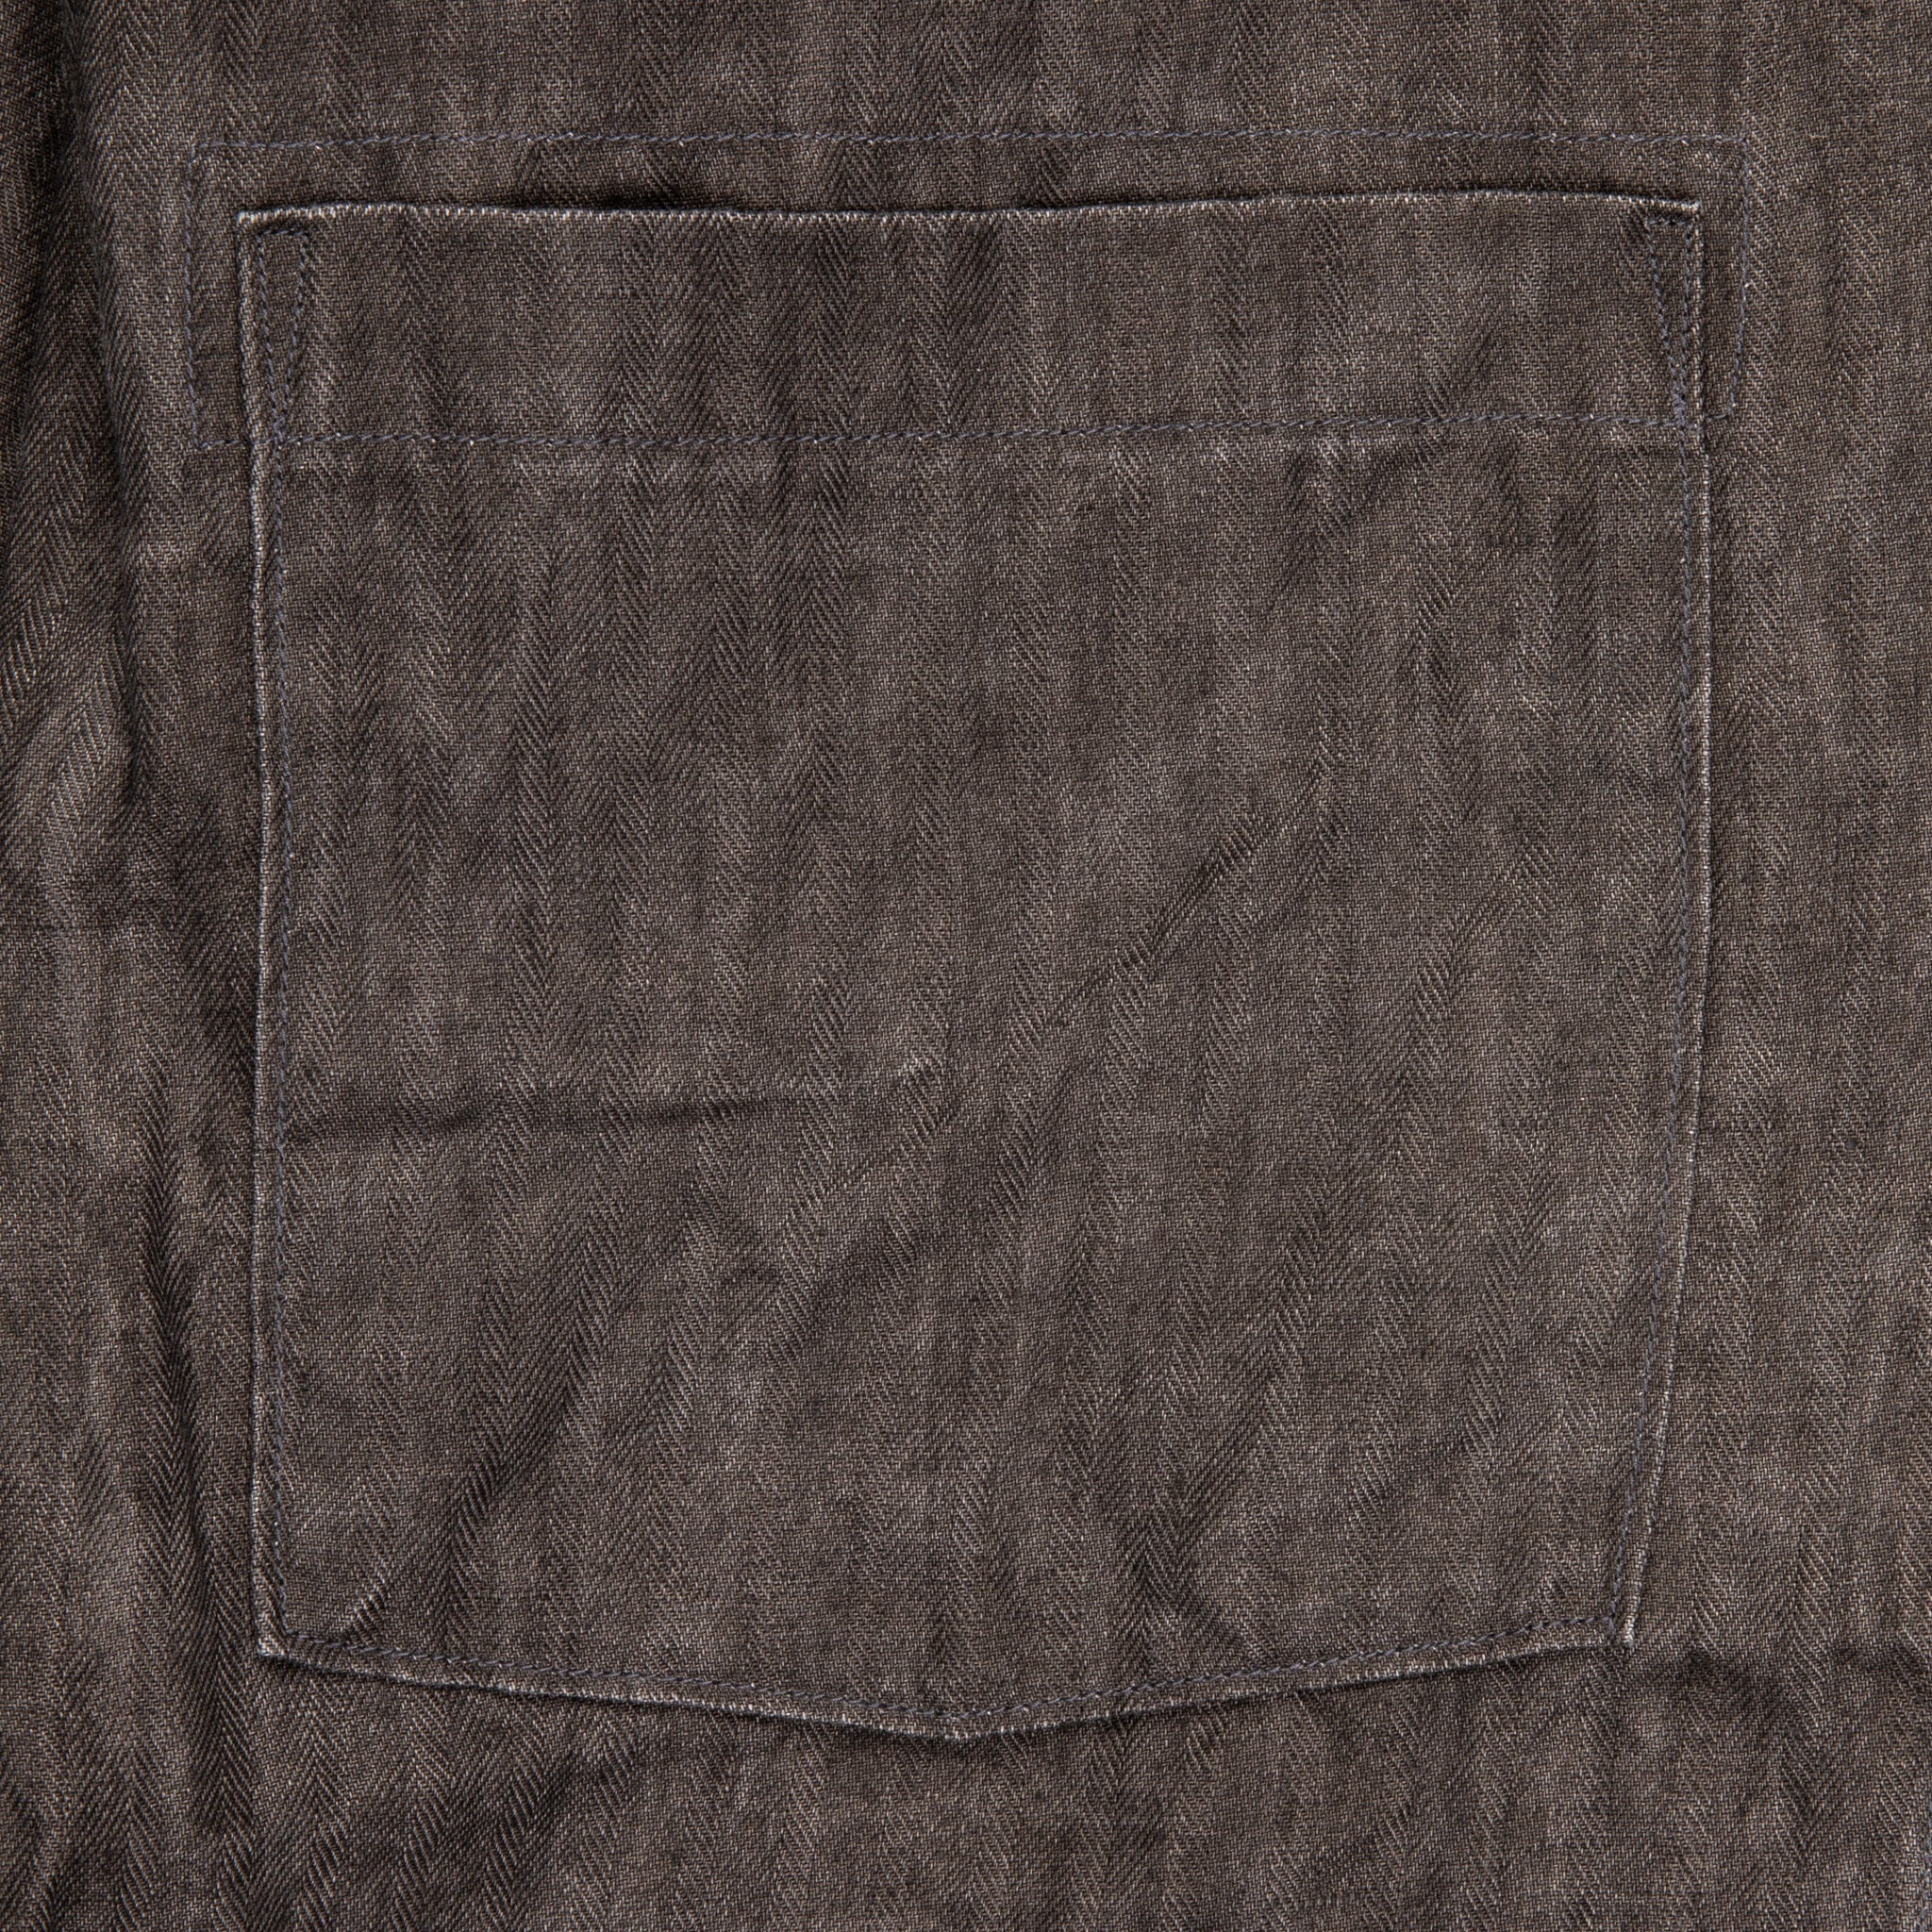 Orslow Simple Work Jacket Sumi Dyed Linen Charcoal